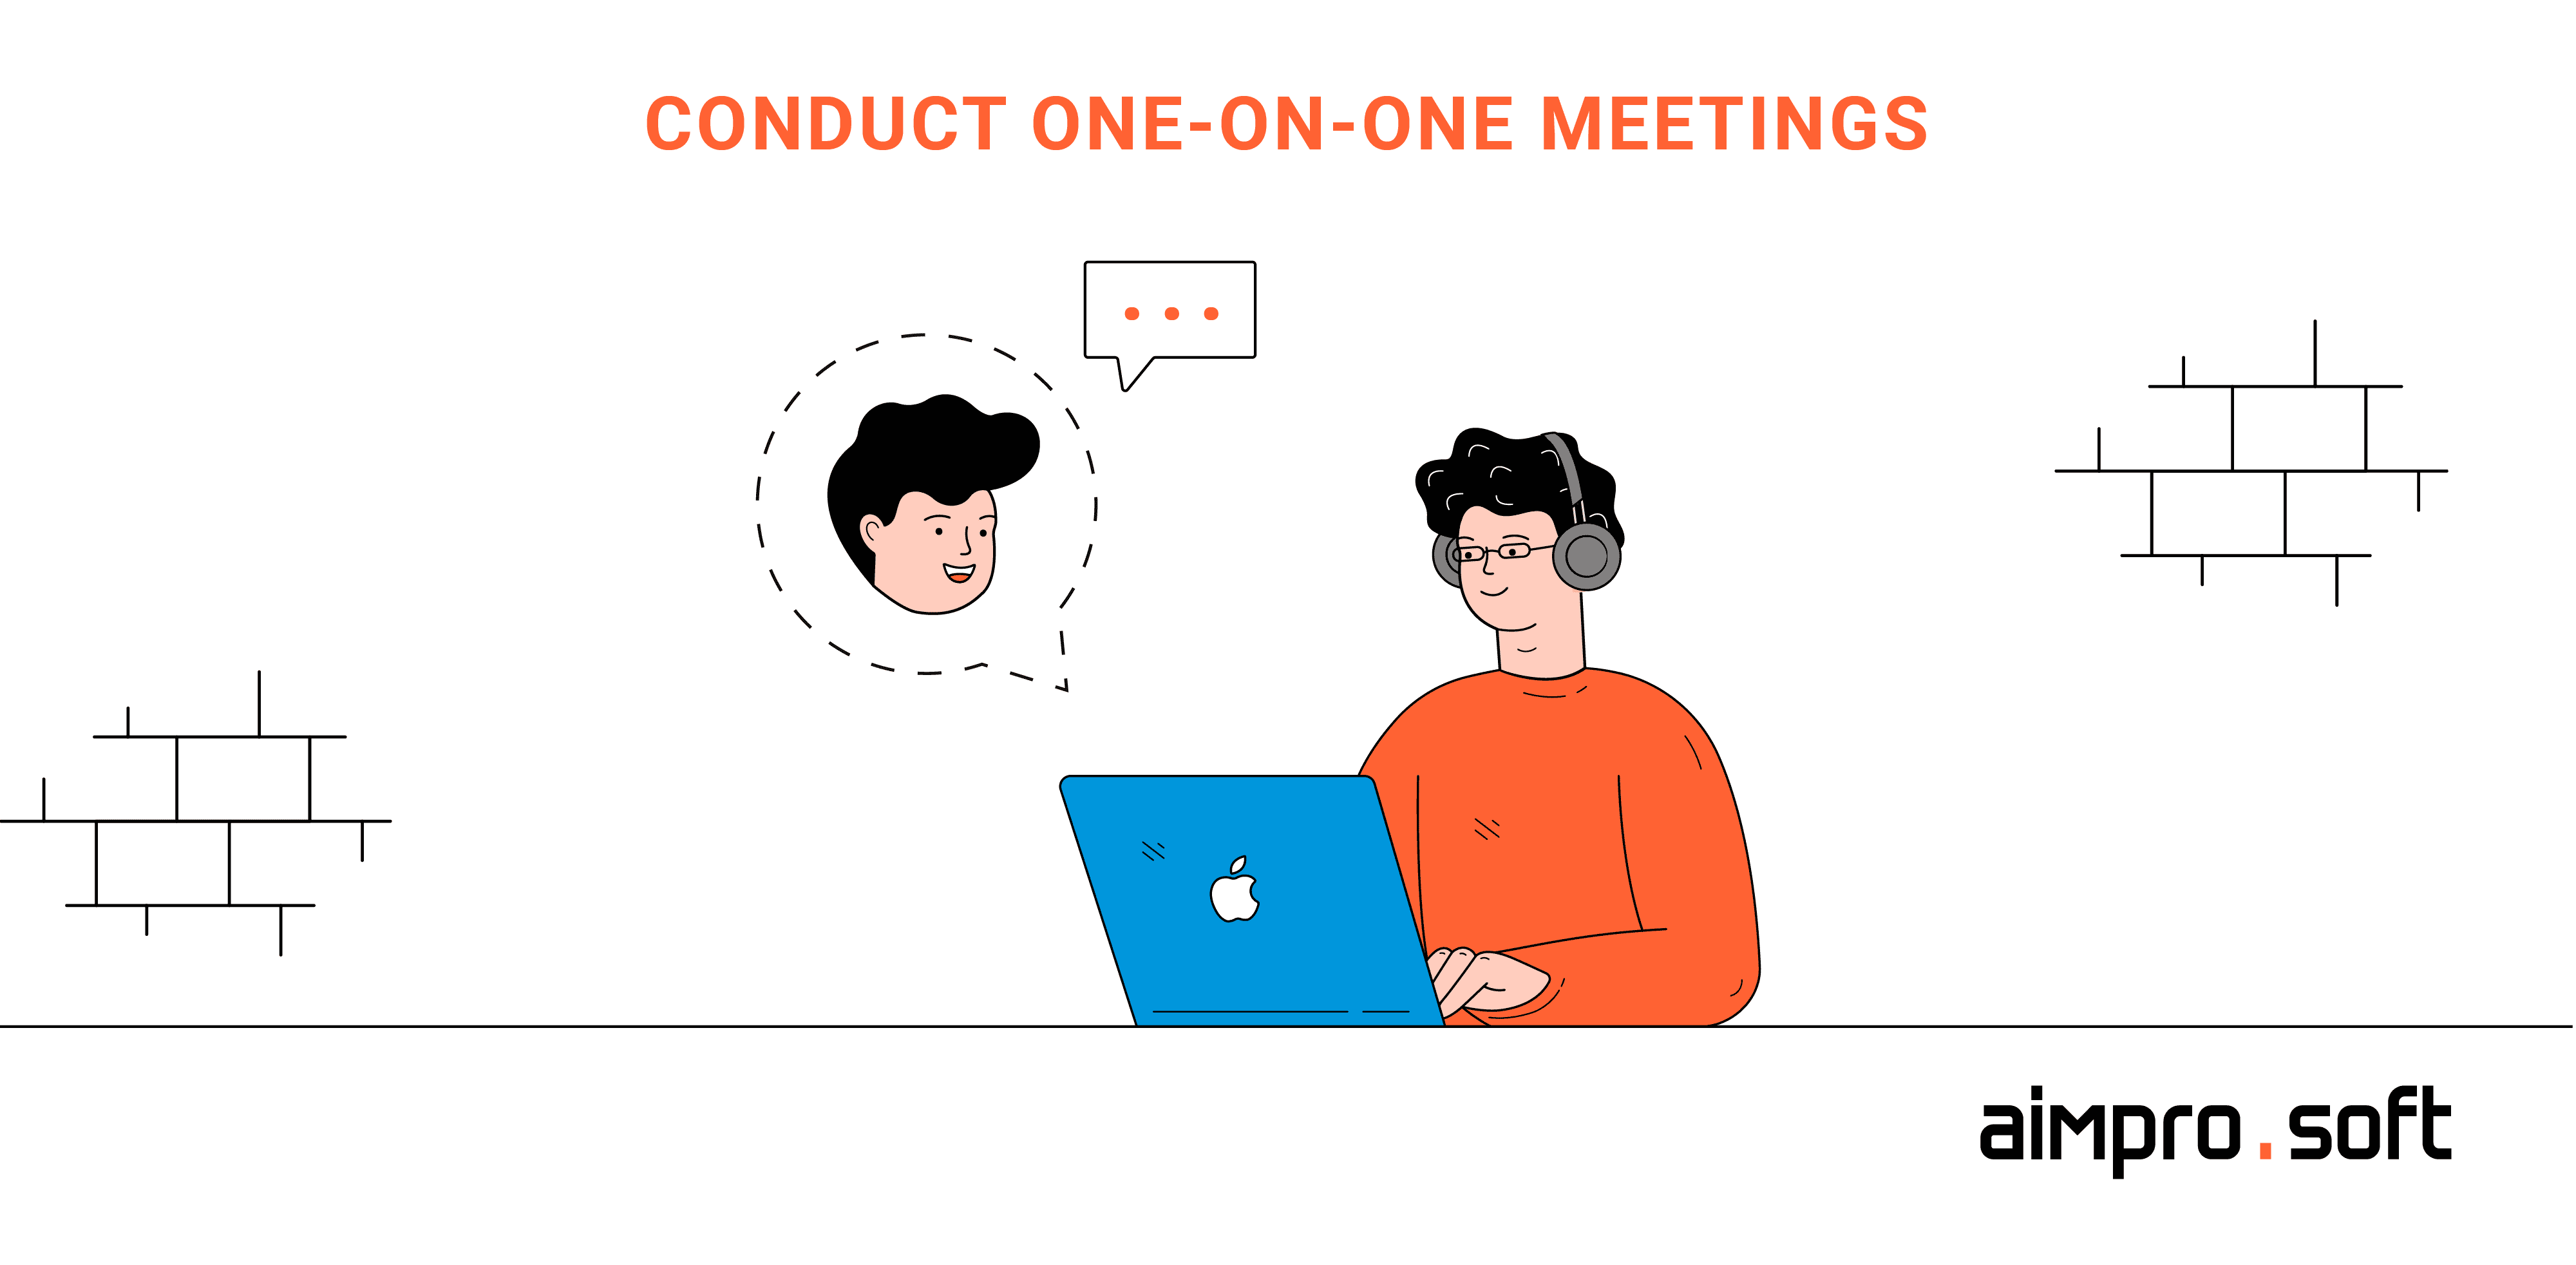 Conduct one-on-one meetings